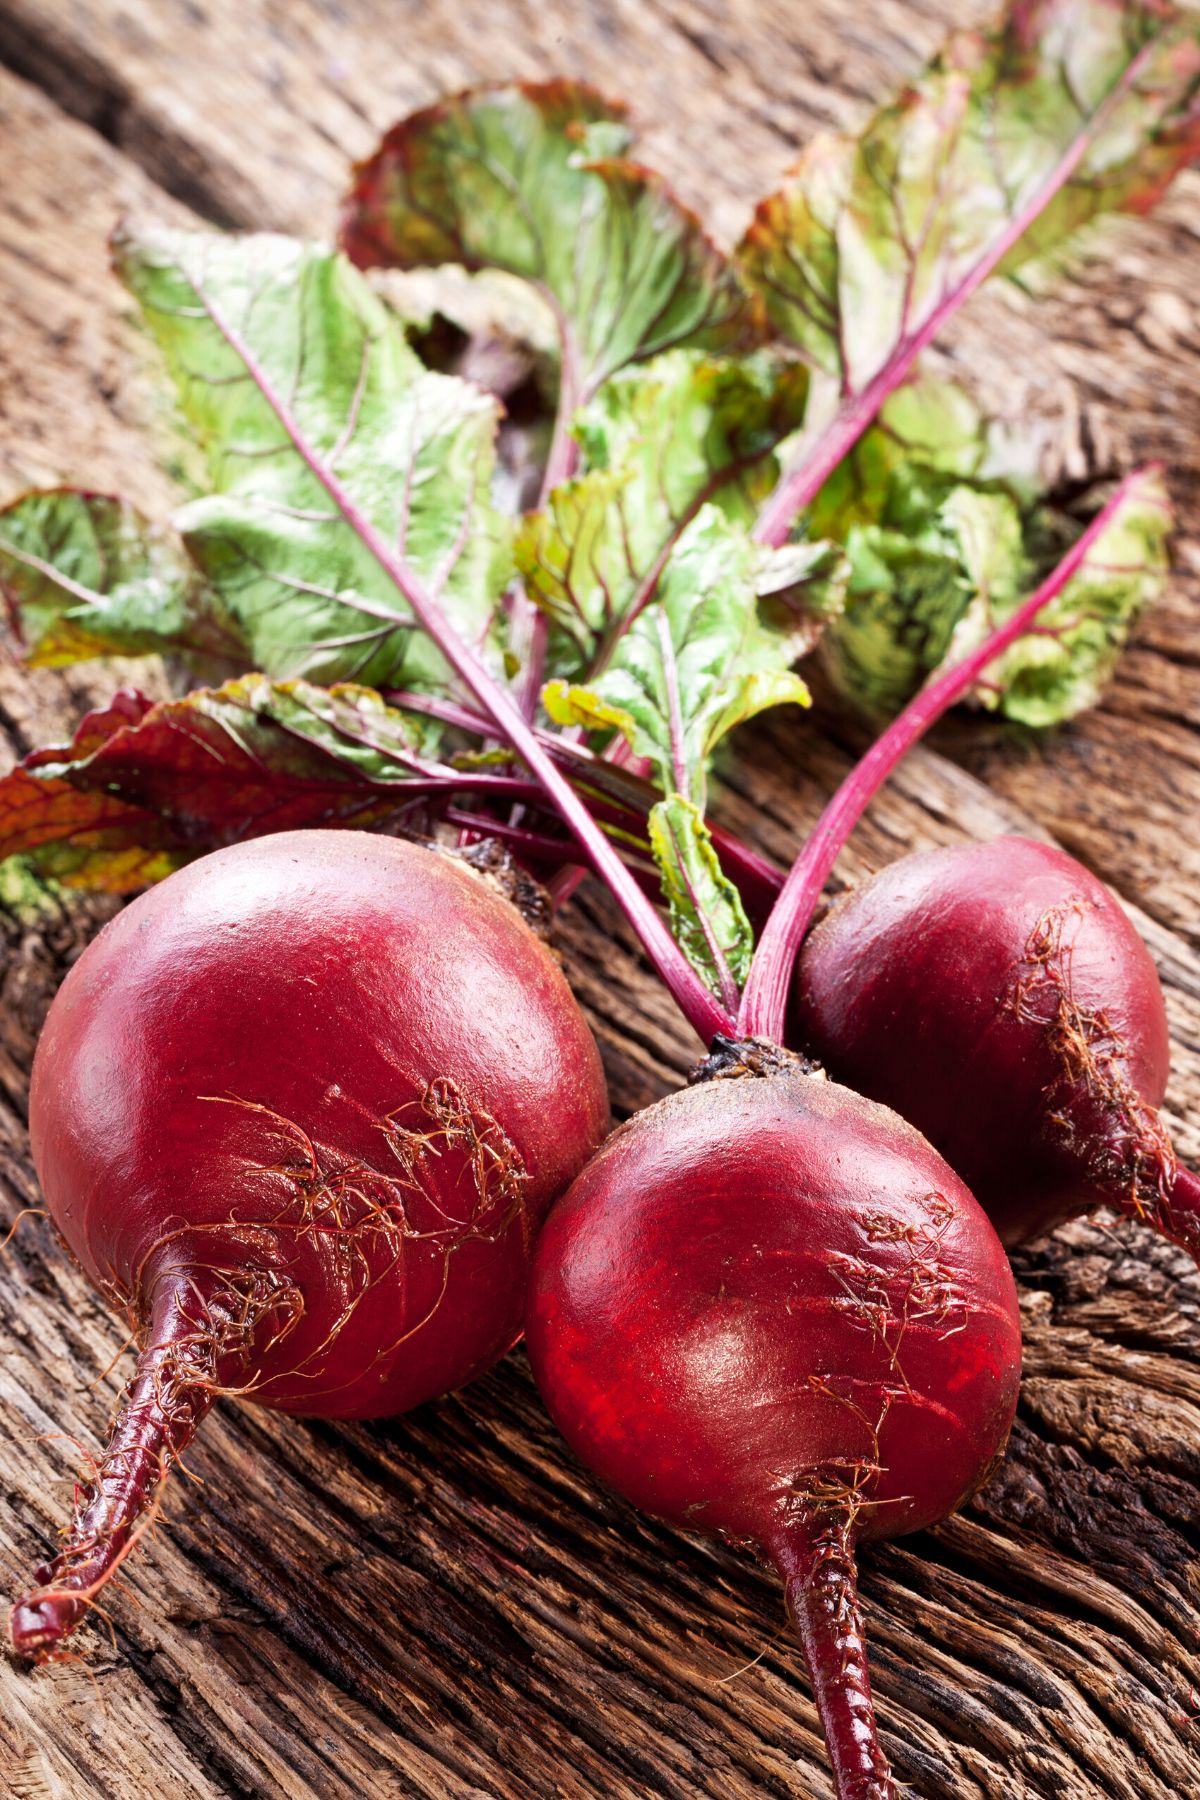 Fresh beets with greens on a wooden table.